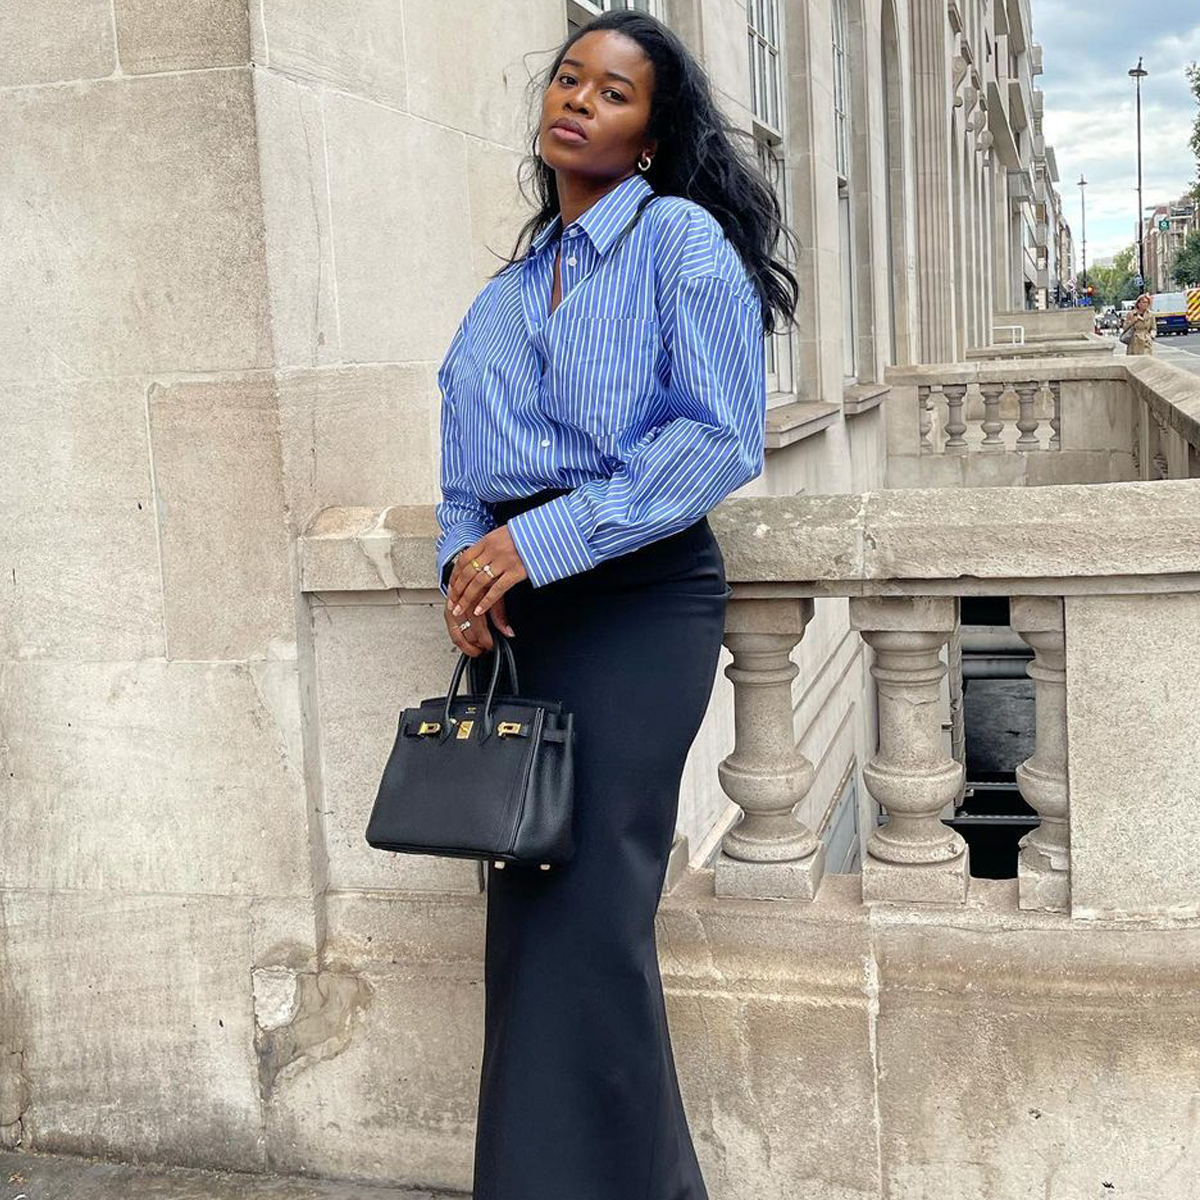 How To Wear A Maxi Skirt For A Chic Look